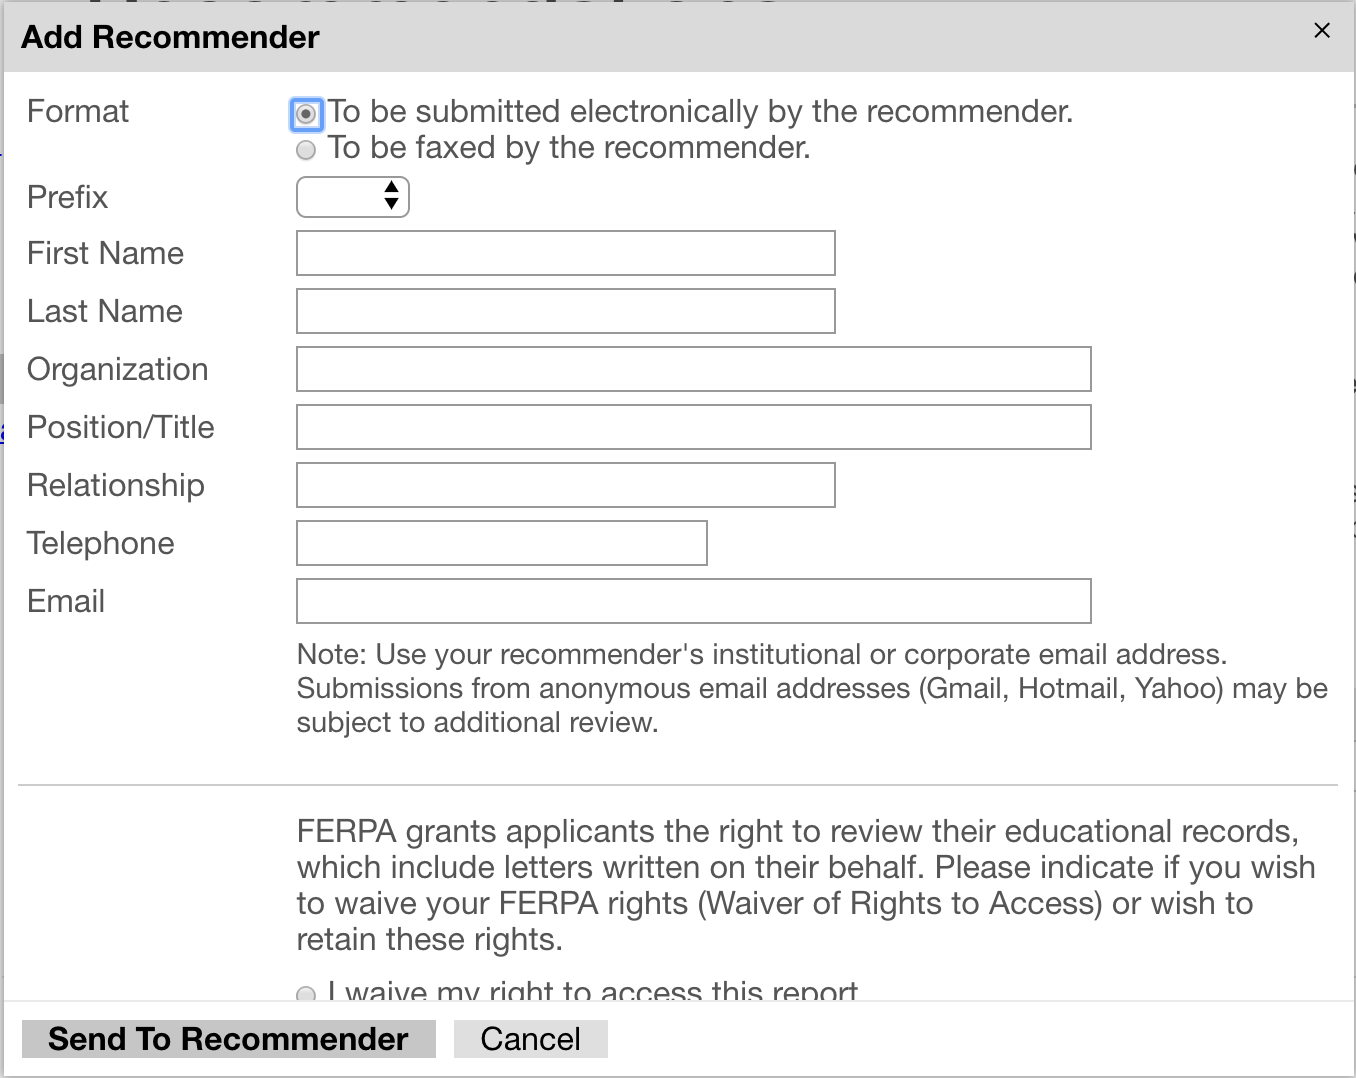 Recommendation Information